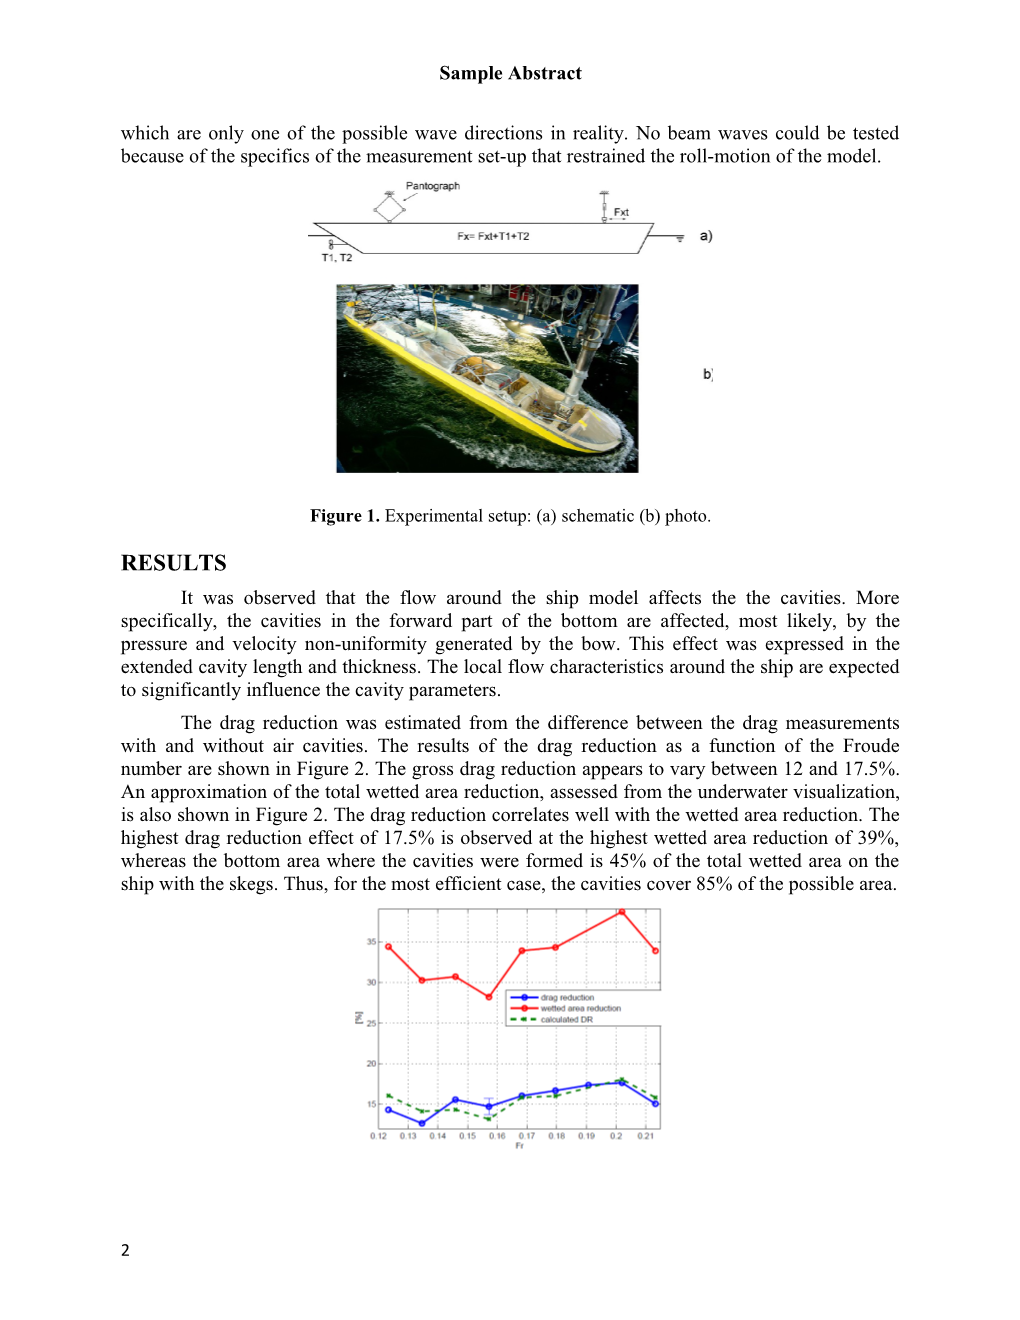 Experimental Study on Drag Reduction by Air Cavities on a Ship Model